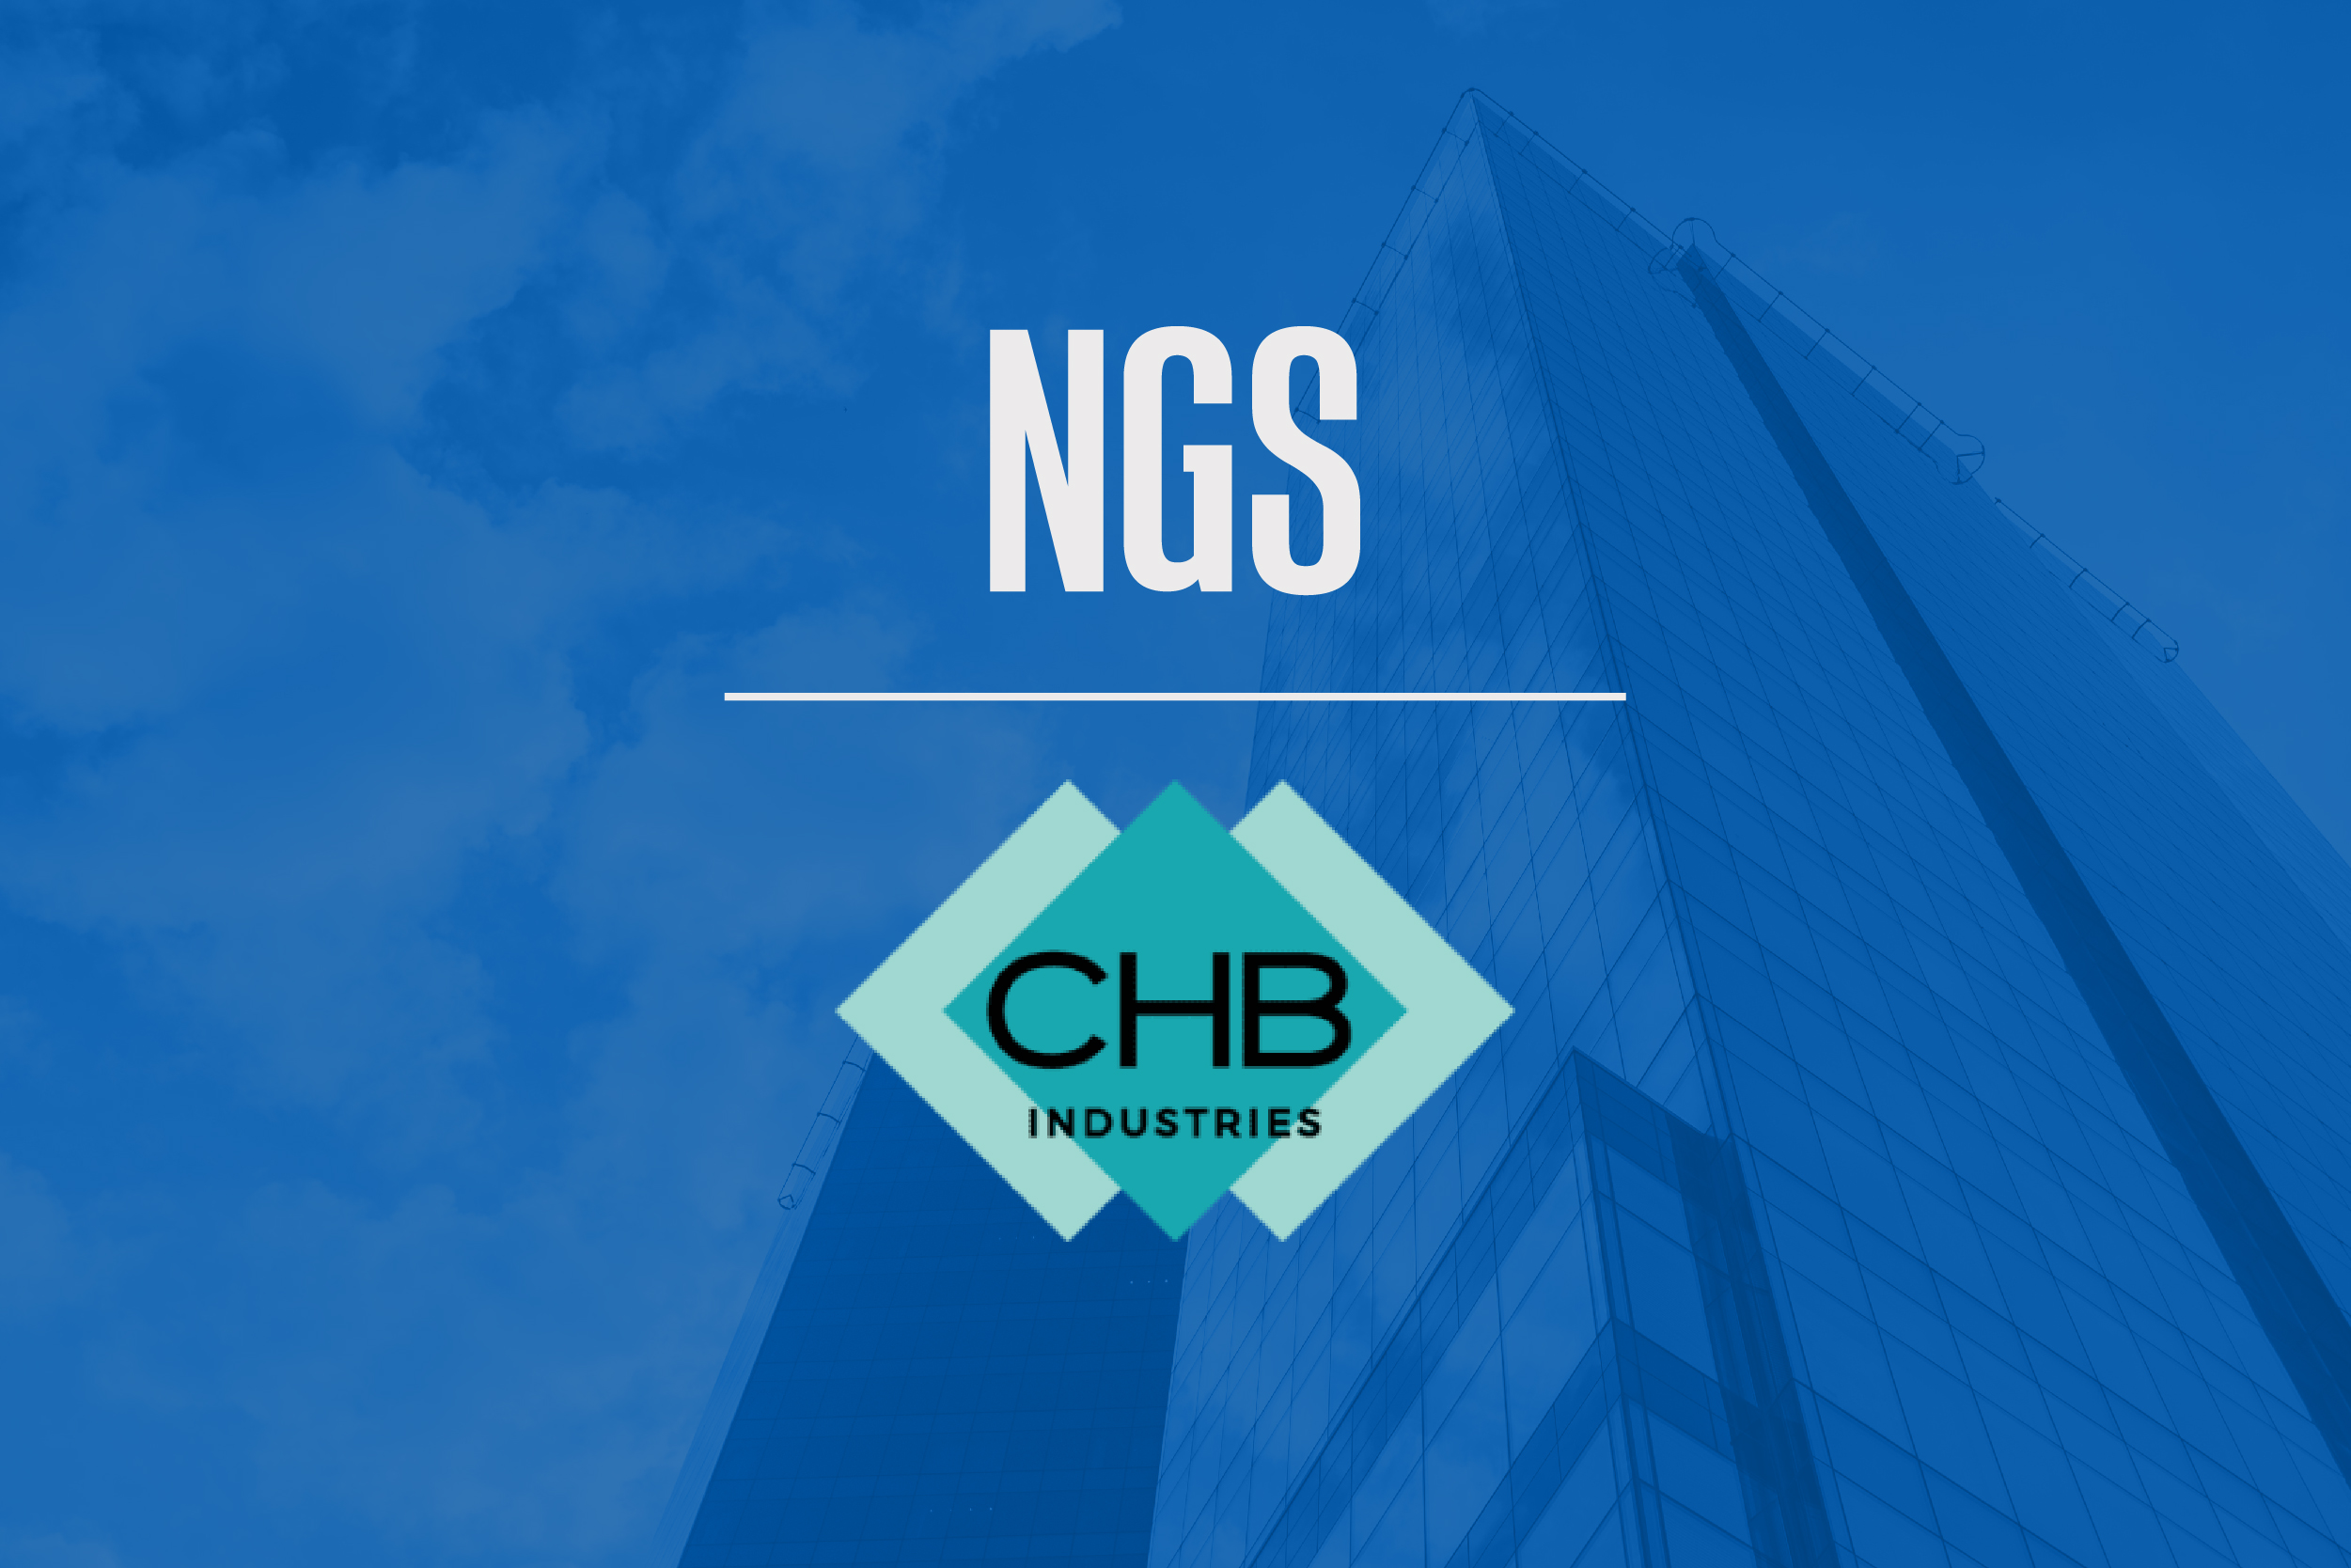 NGS acquires CHB Industries